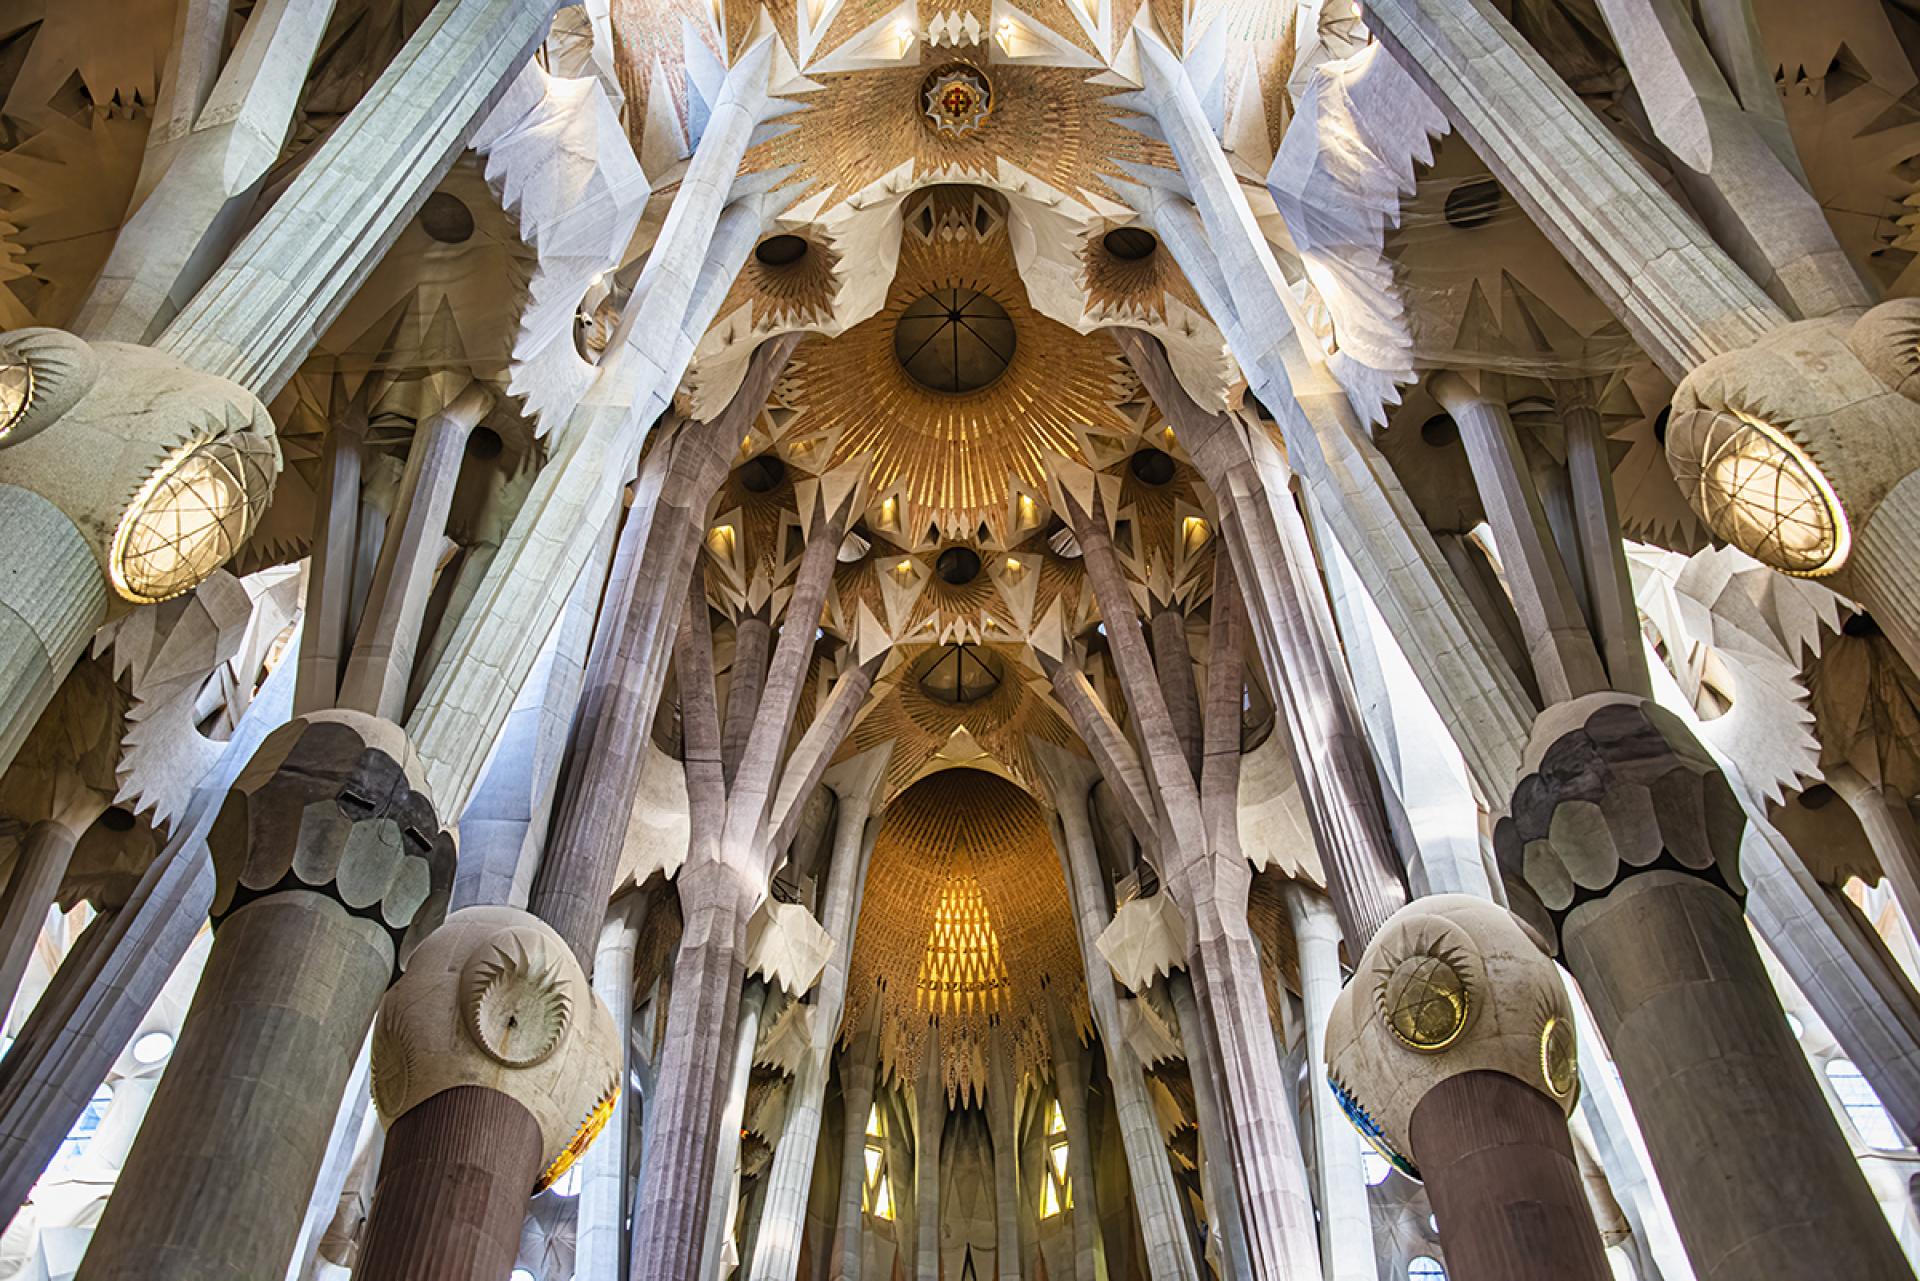 London Photography Awards Winner - Cathedral, Barcelona